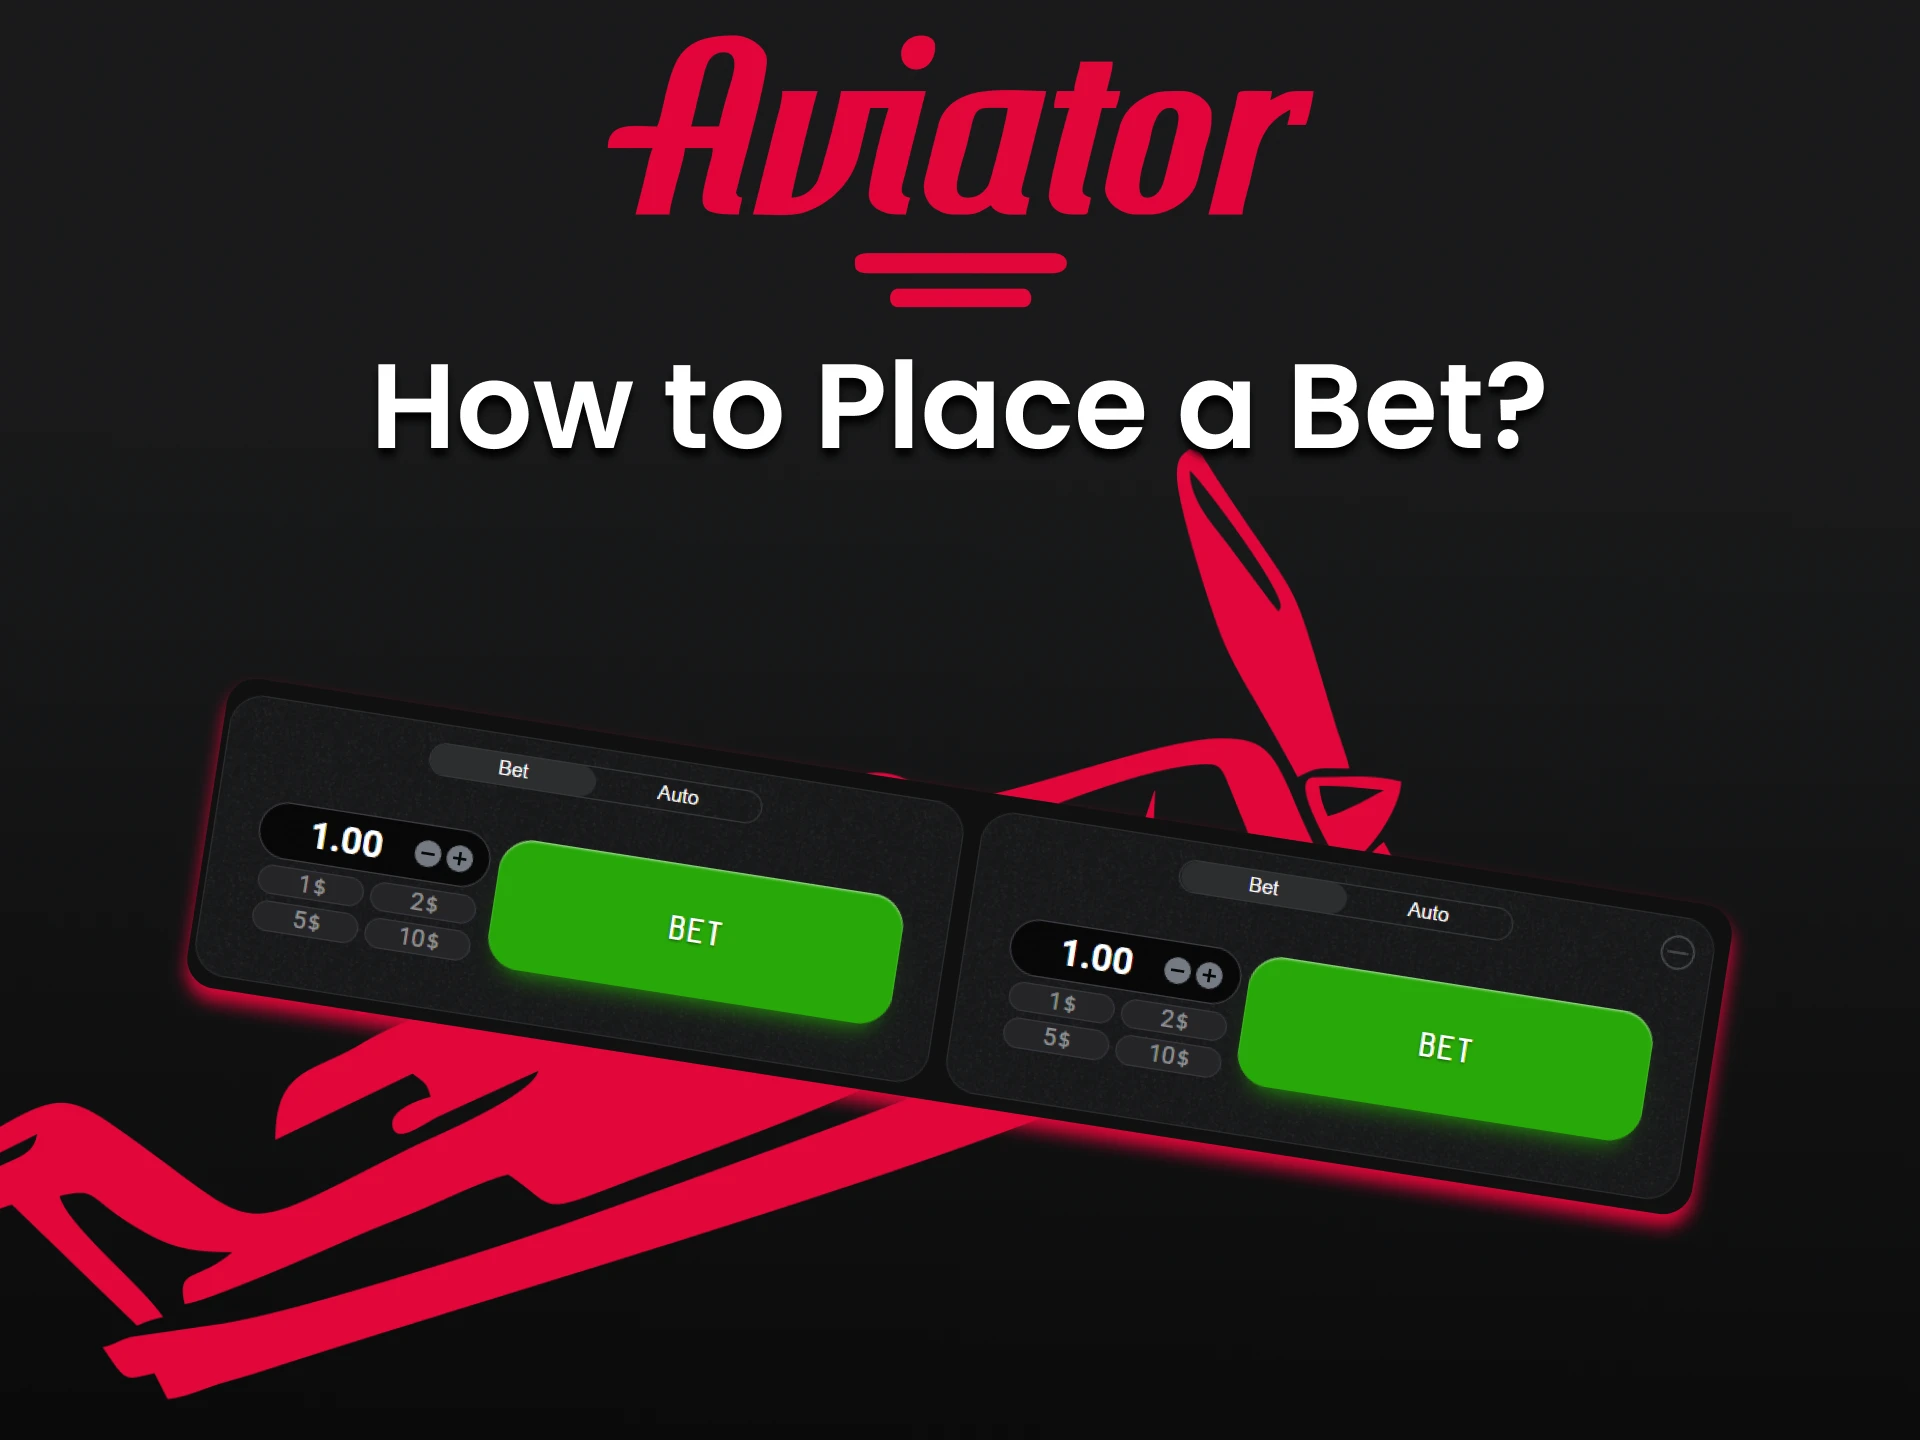 In the Demo version of the game Aviator, you can also place bets.